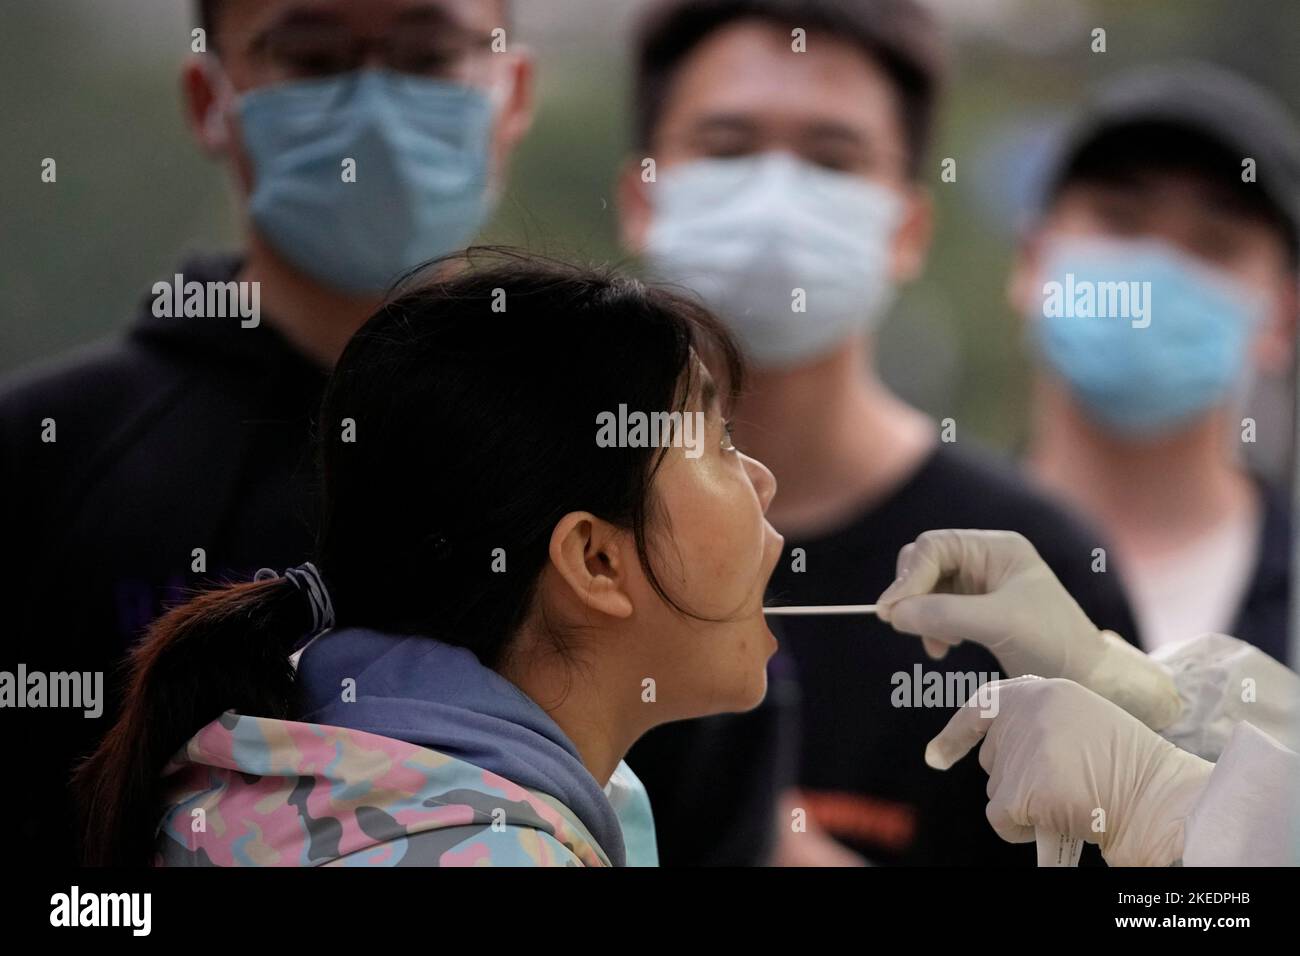 A woman gets tested for the coronavirus disease (COVID-19) at a nucleic acid testing site, following the coronavirus disease (COVID-19) outbreak in Shanghai, China, November 11, 2022. REUTERS/Aly Song Stock Photo